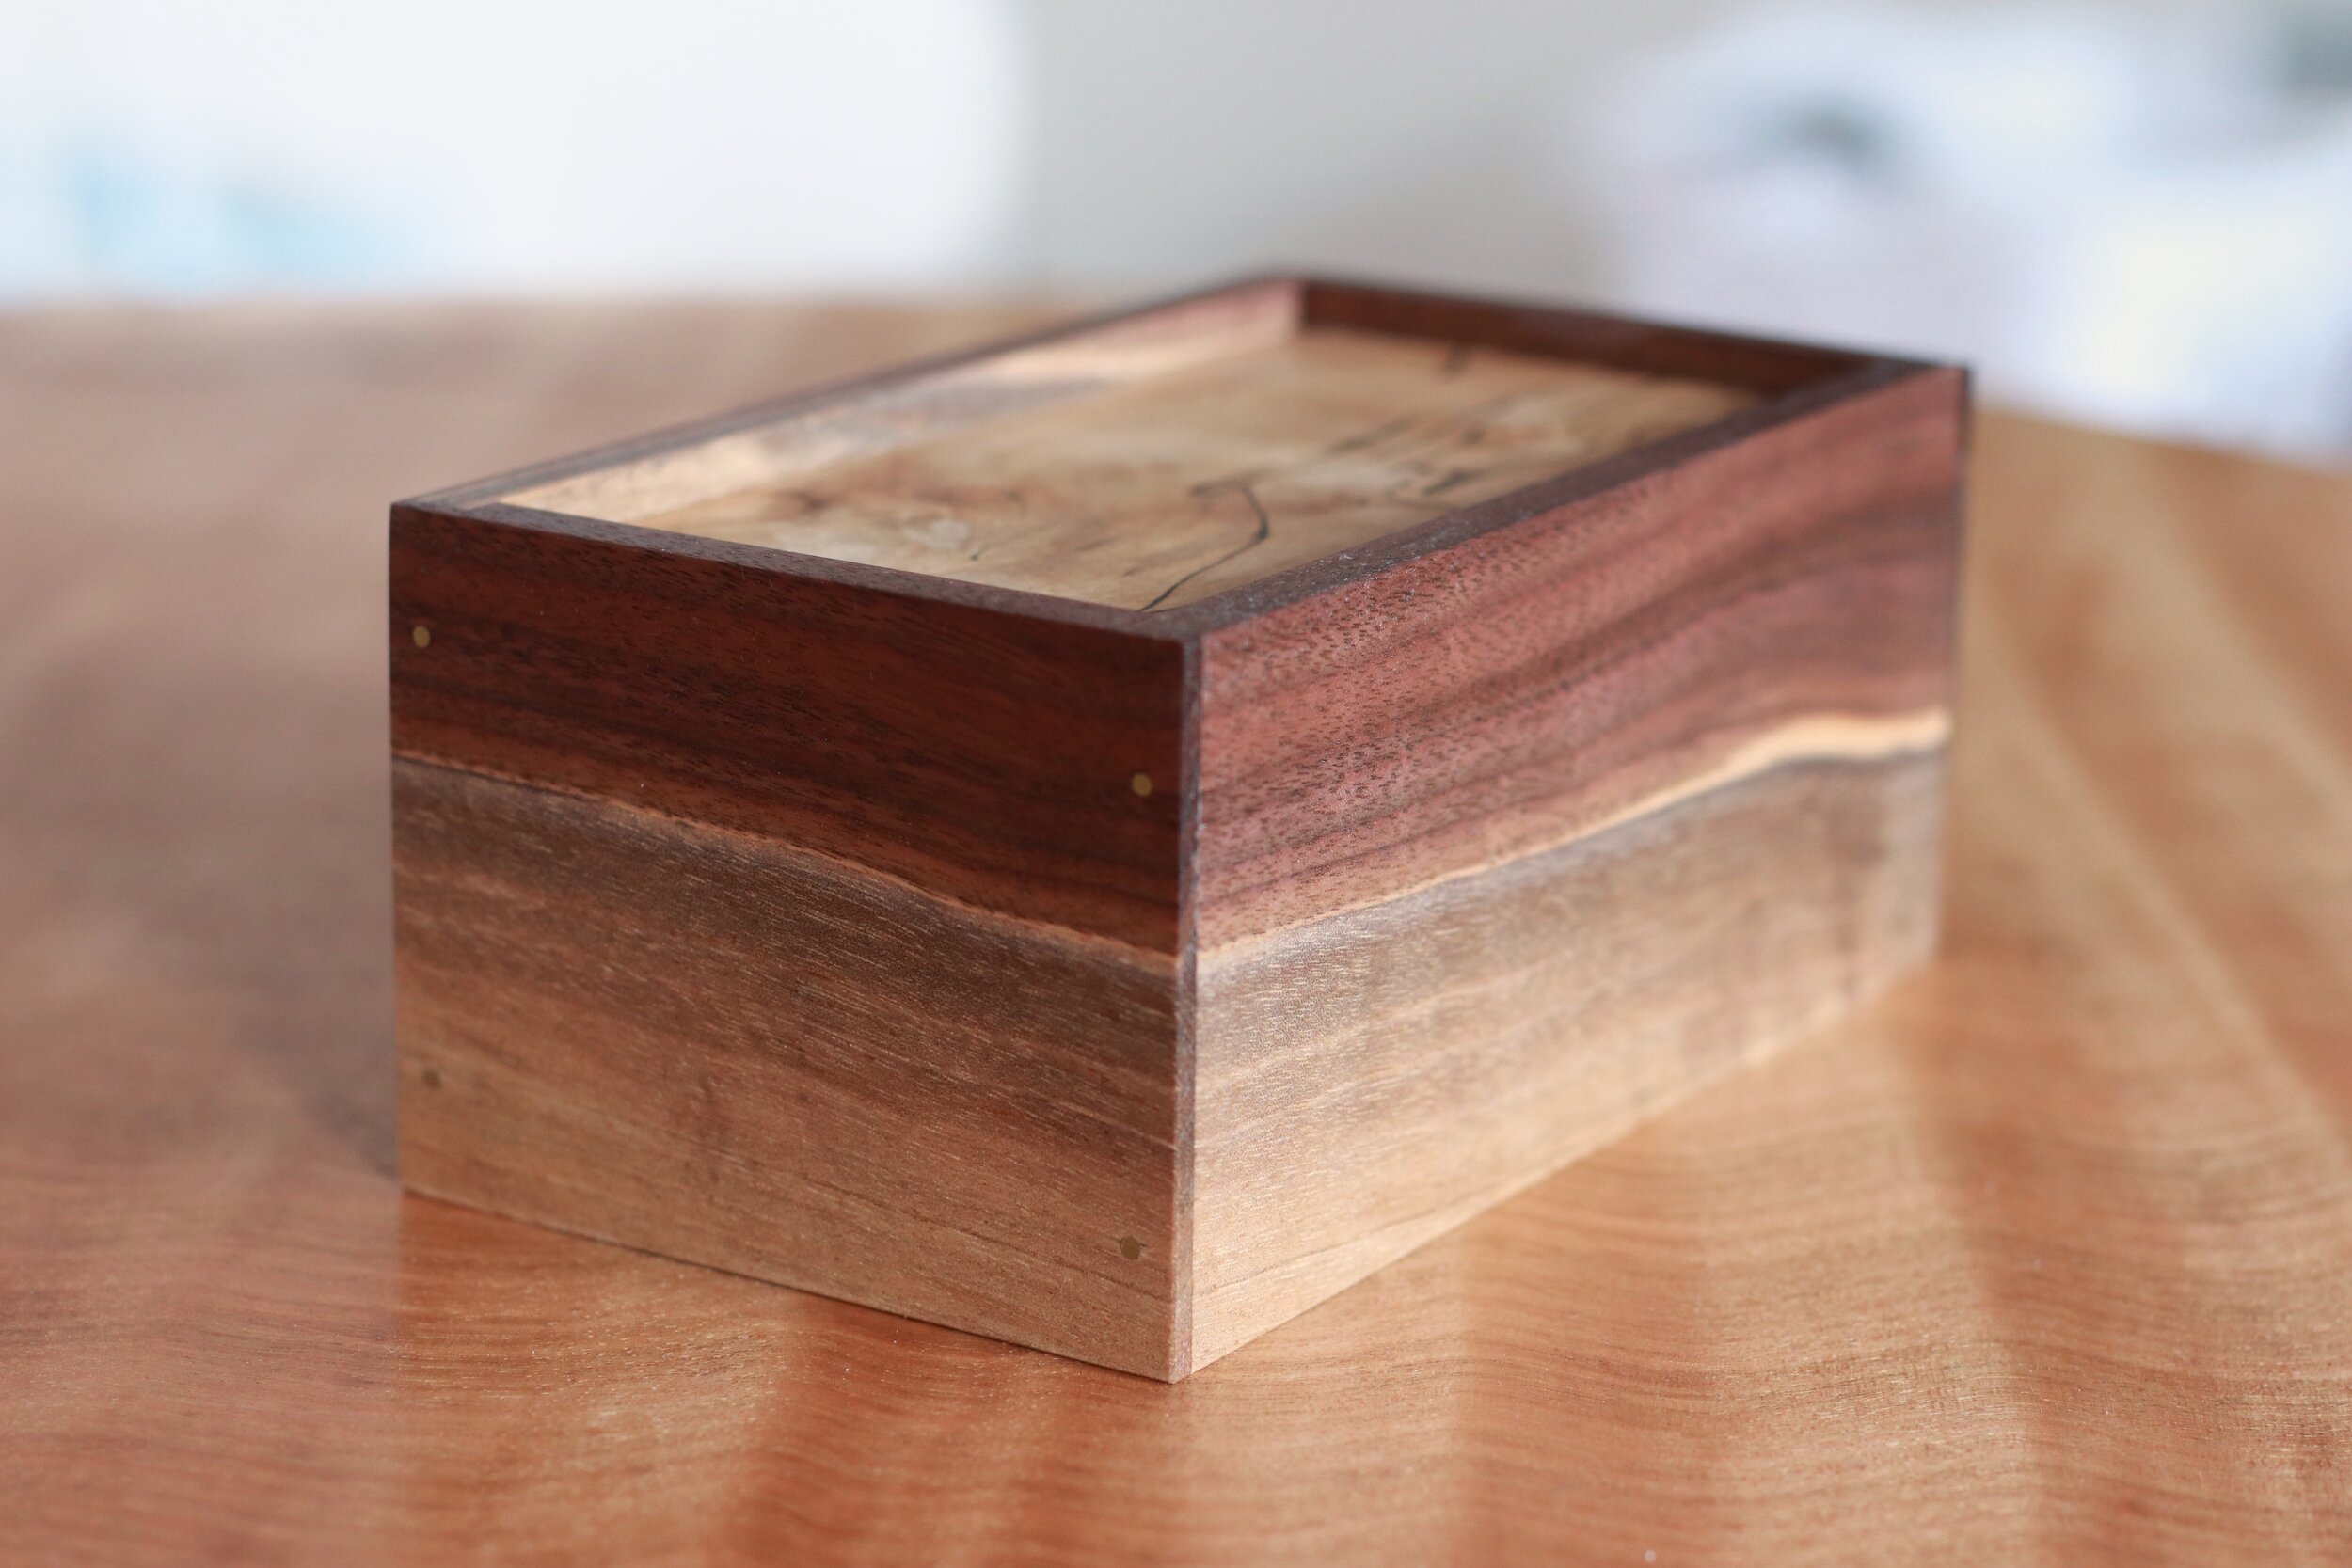 Simple Lidded Box Plans E N Curtis, Medium Size Wooden Box With Lid Plans